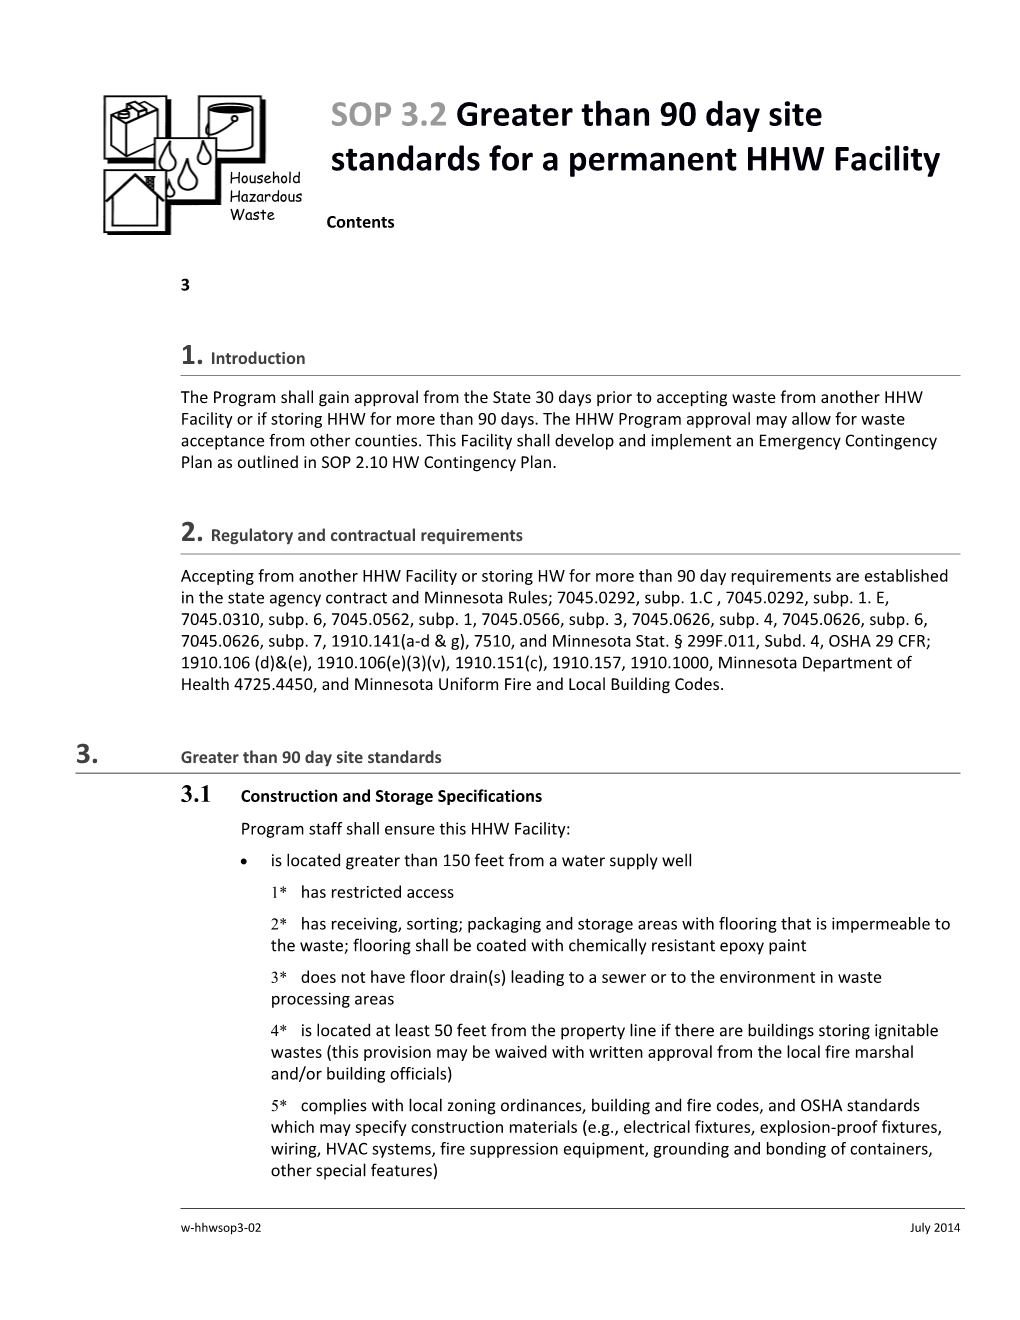 3.2 Greater Than 90 Day Site Standards for a Permanent HHW Facility